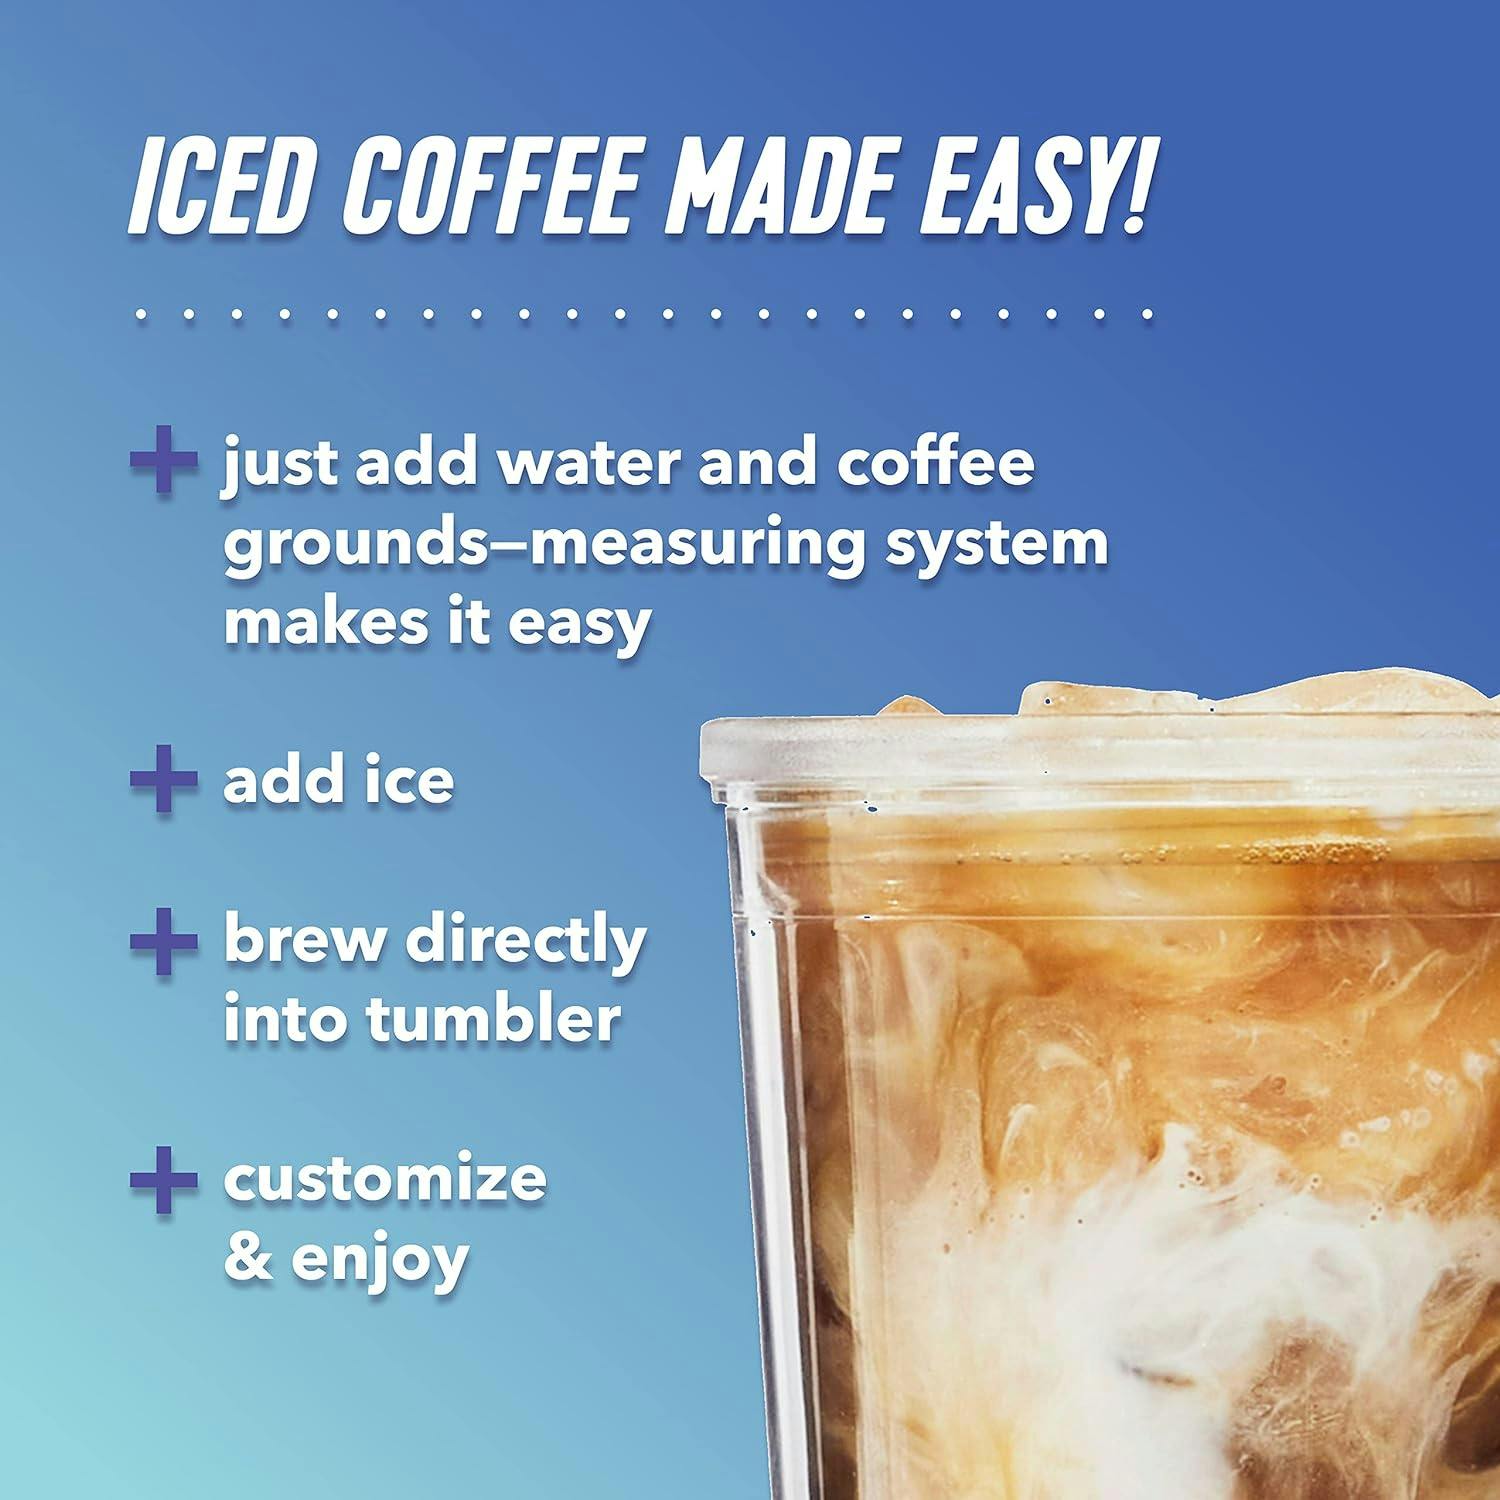 Sleek Black Programmable Iced Coffee Maker with Reusable Filter